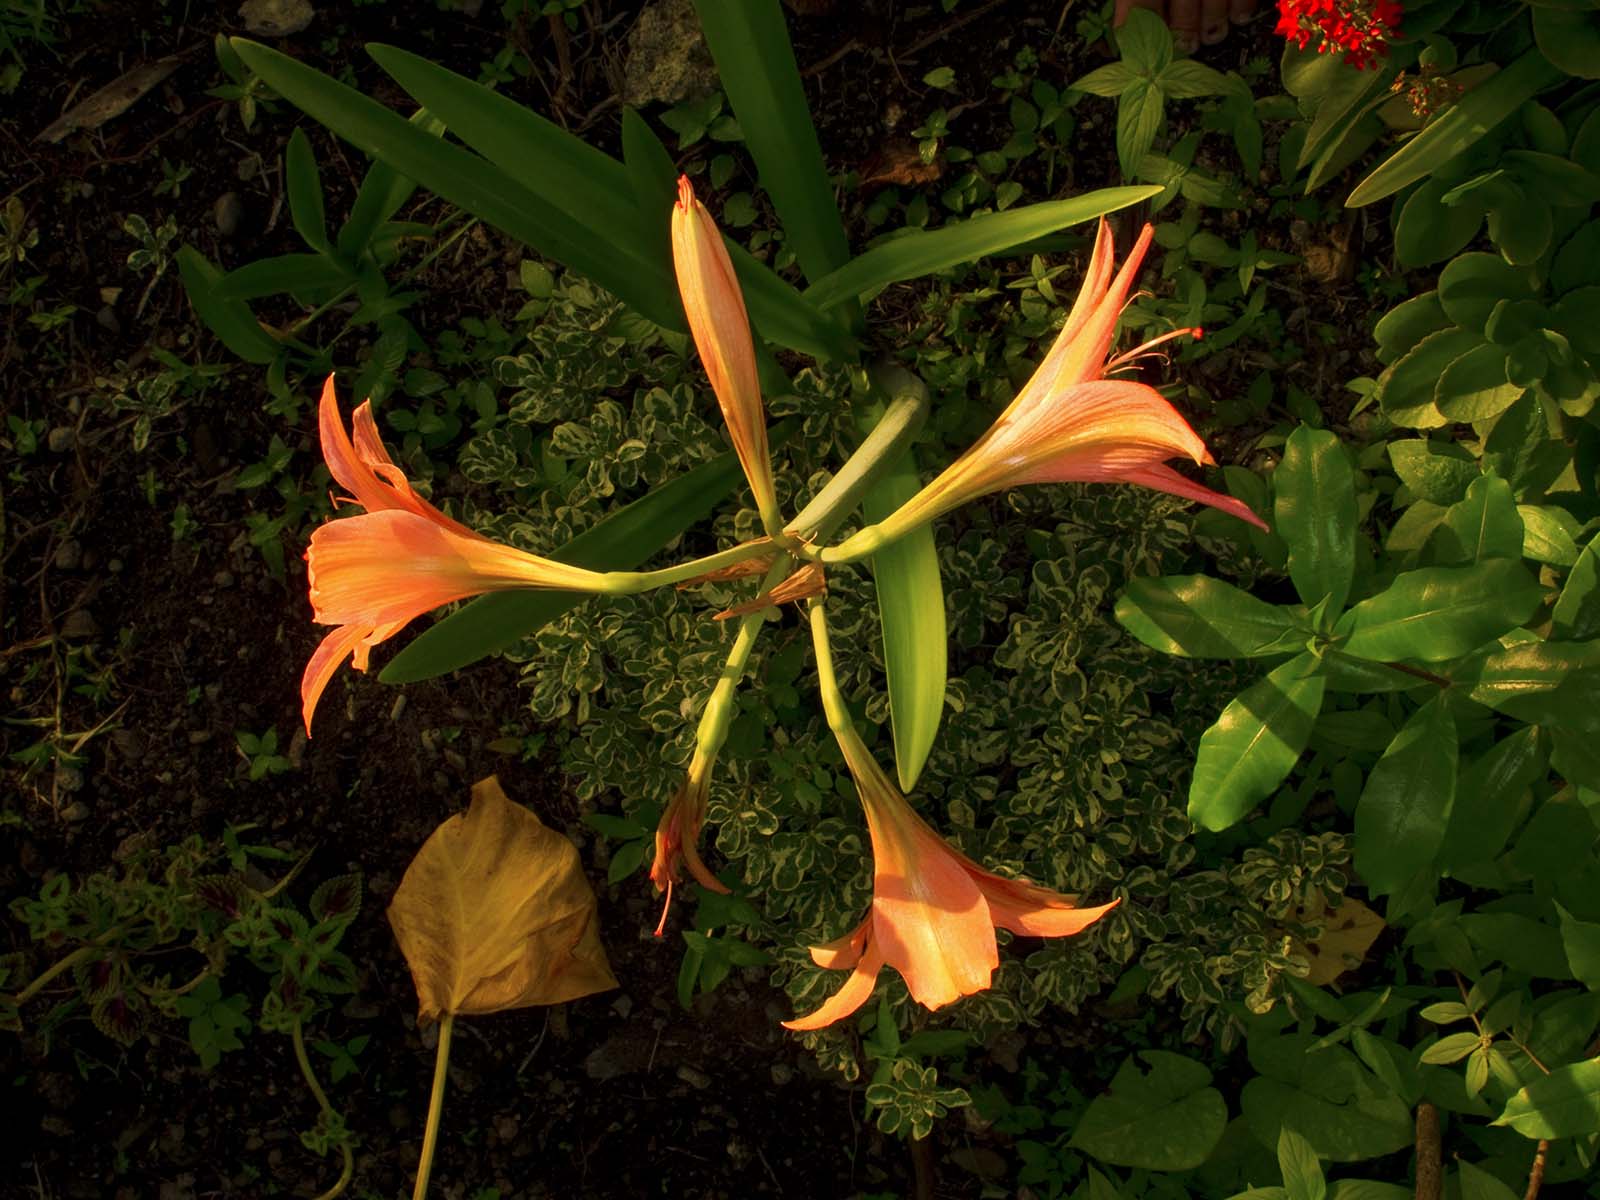 We’ll get to the underwater shots after I show you our orange lilies 